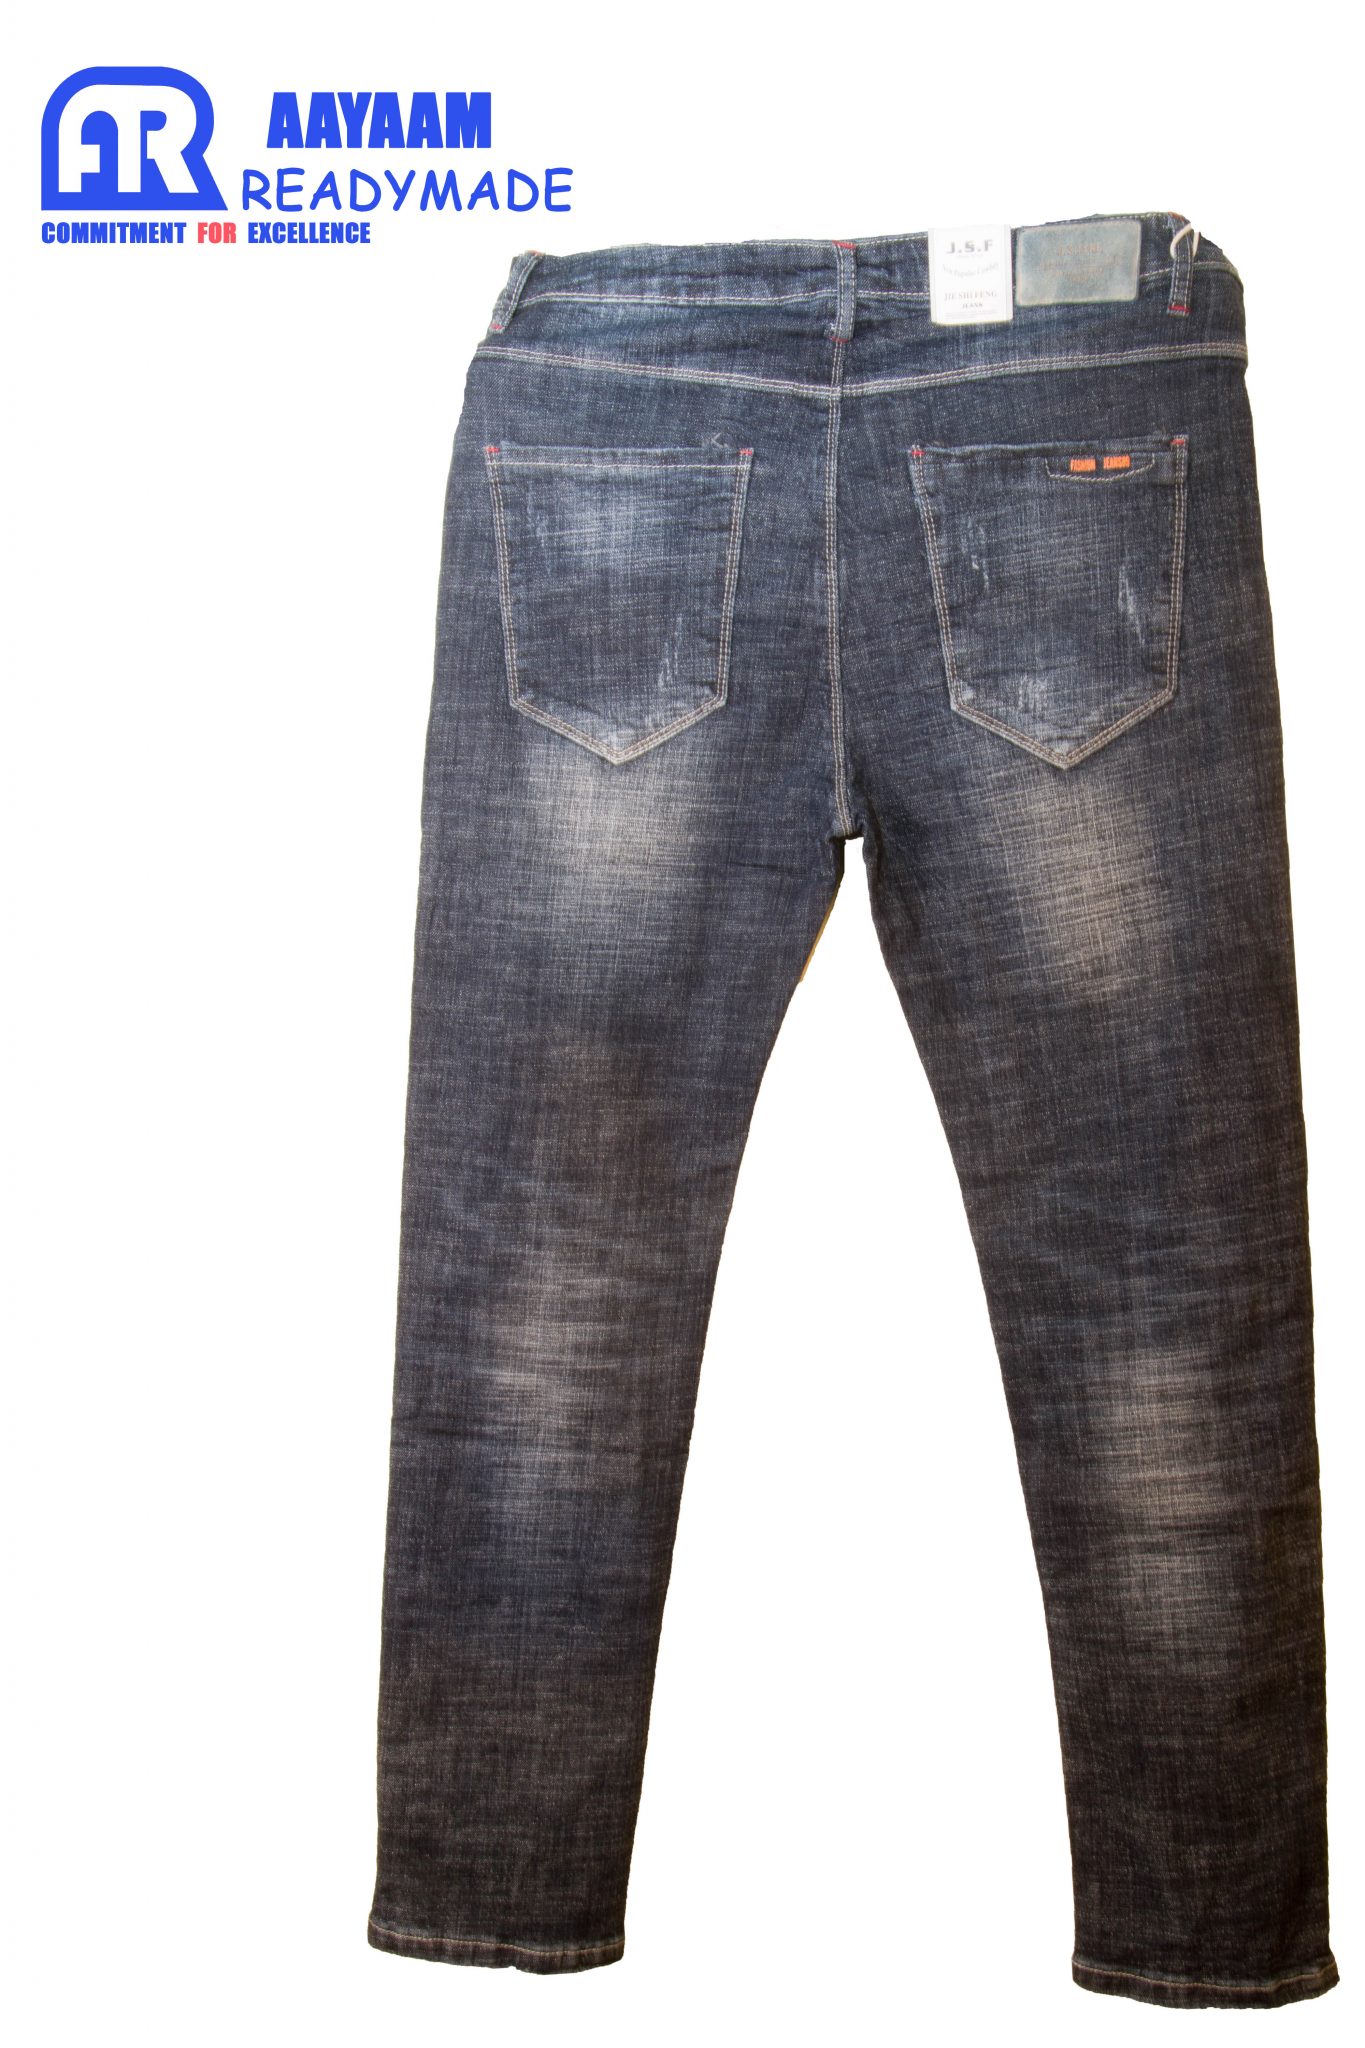 Midnight washed Jeans for Men